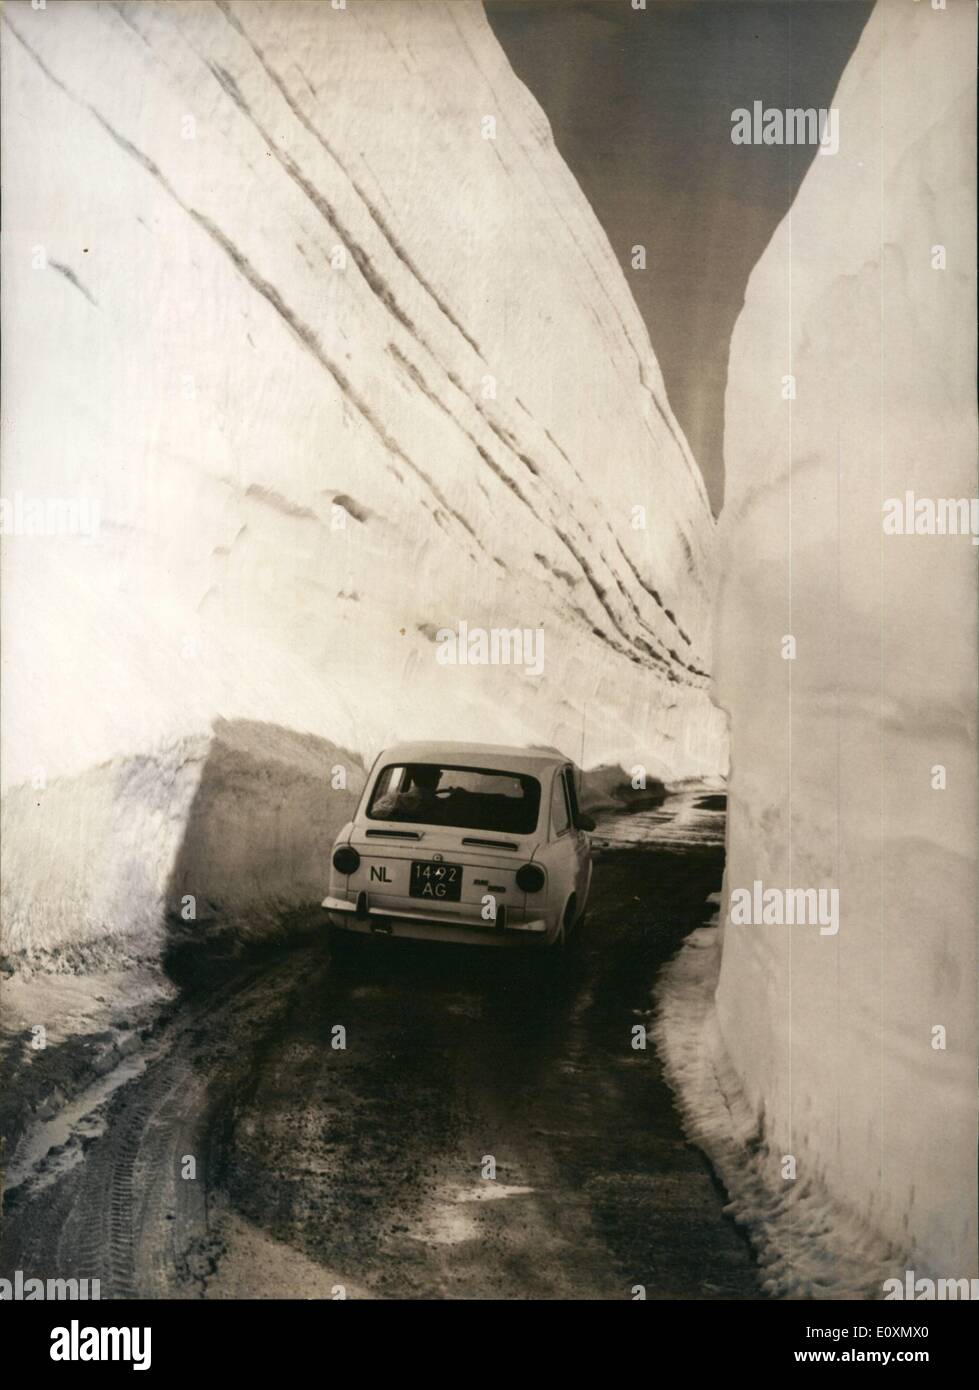 Jun. 06, 1967 - Switzerland opens 2161 meters Grimsel pass road one of the first cars passing after this years opening of the Grimsel road near the top, where snow is still 16 meters high. Stock Photo